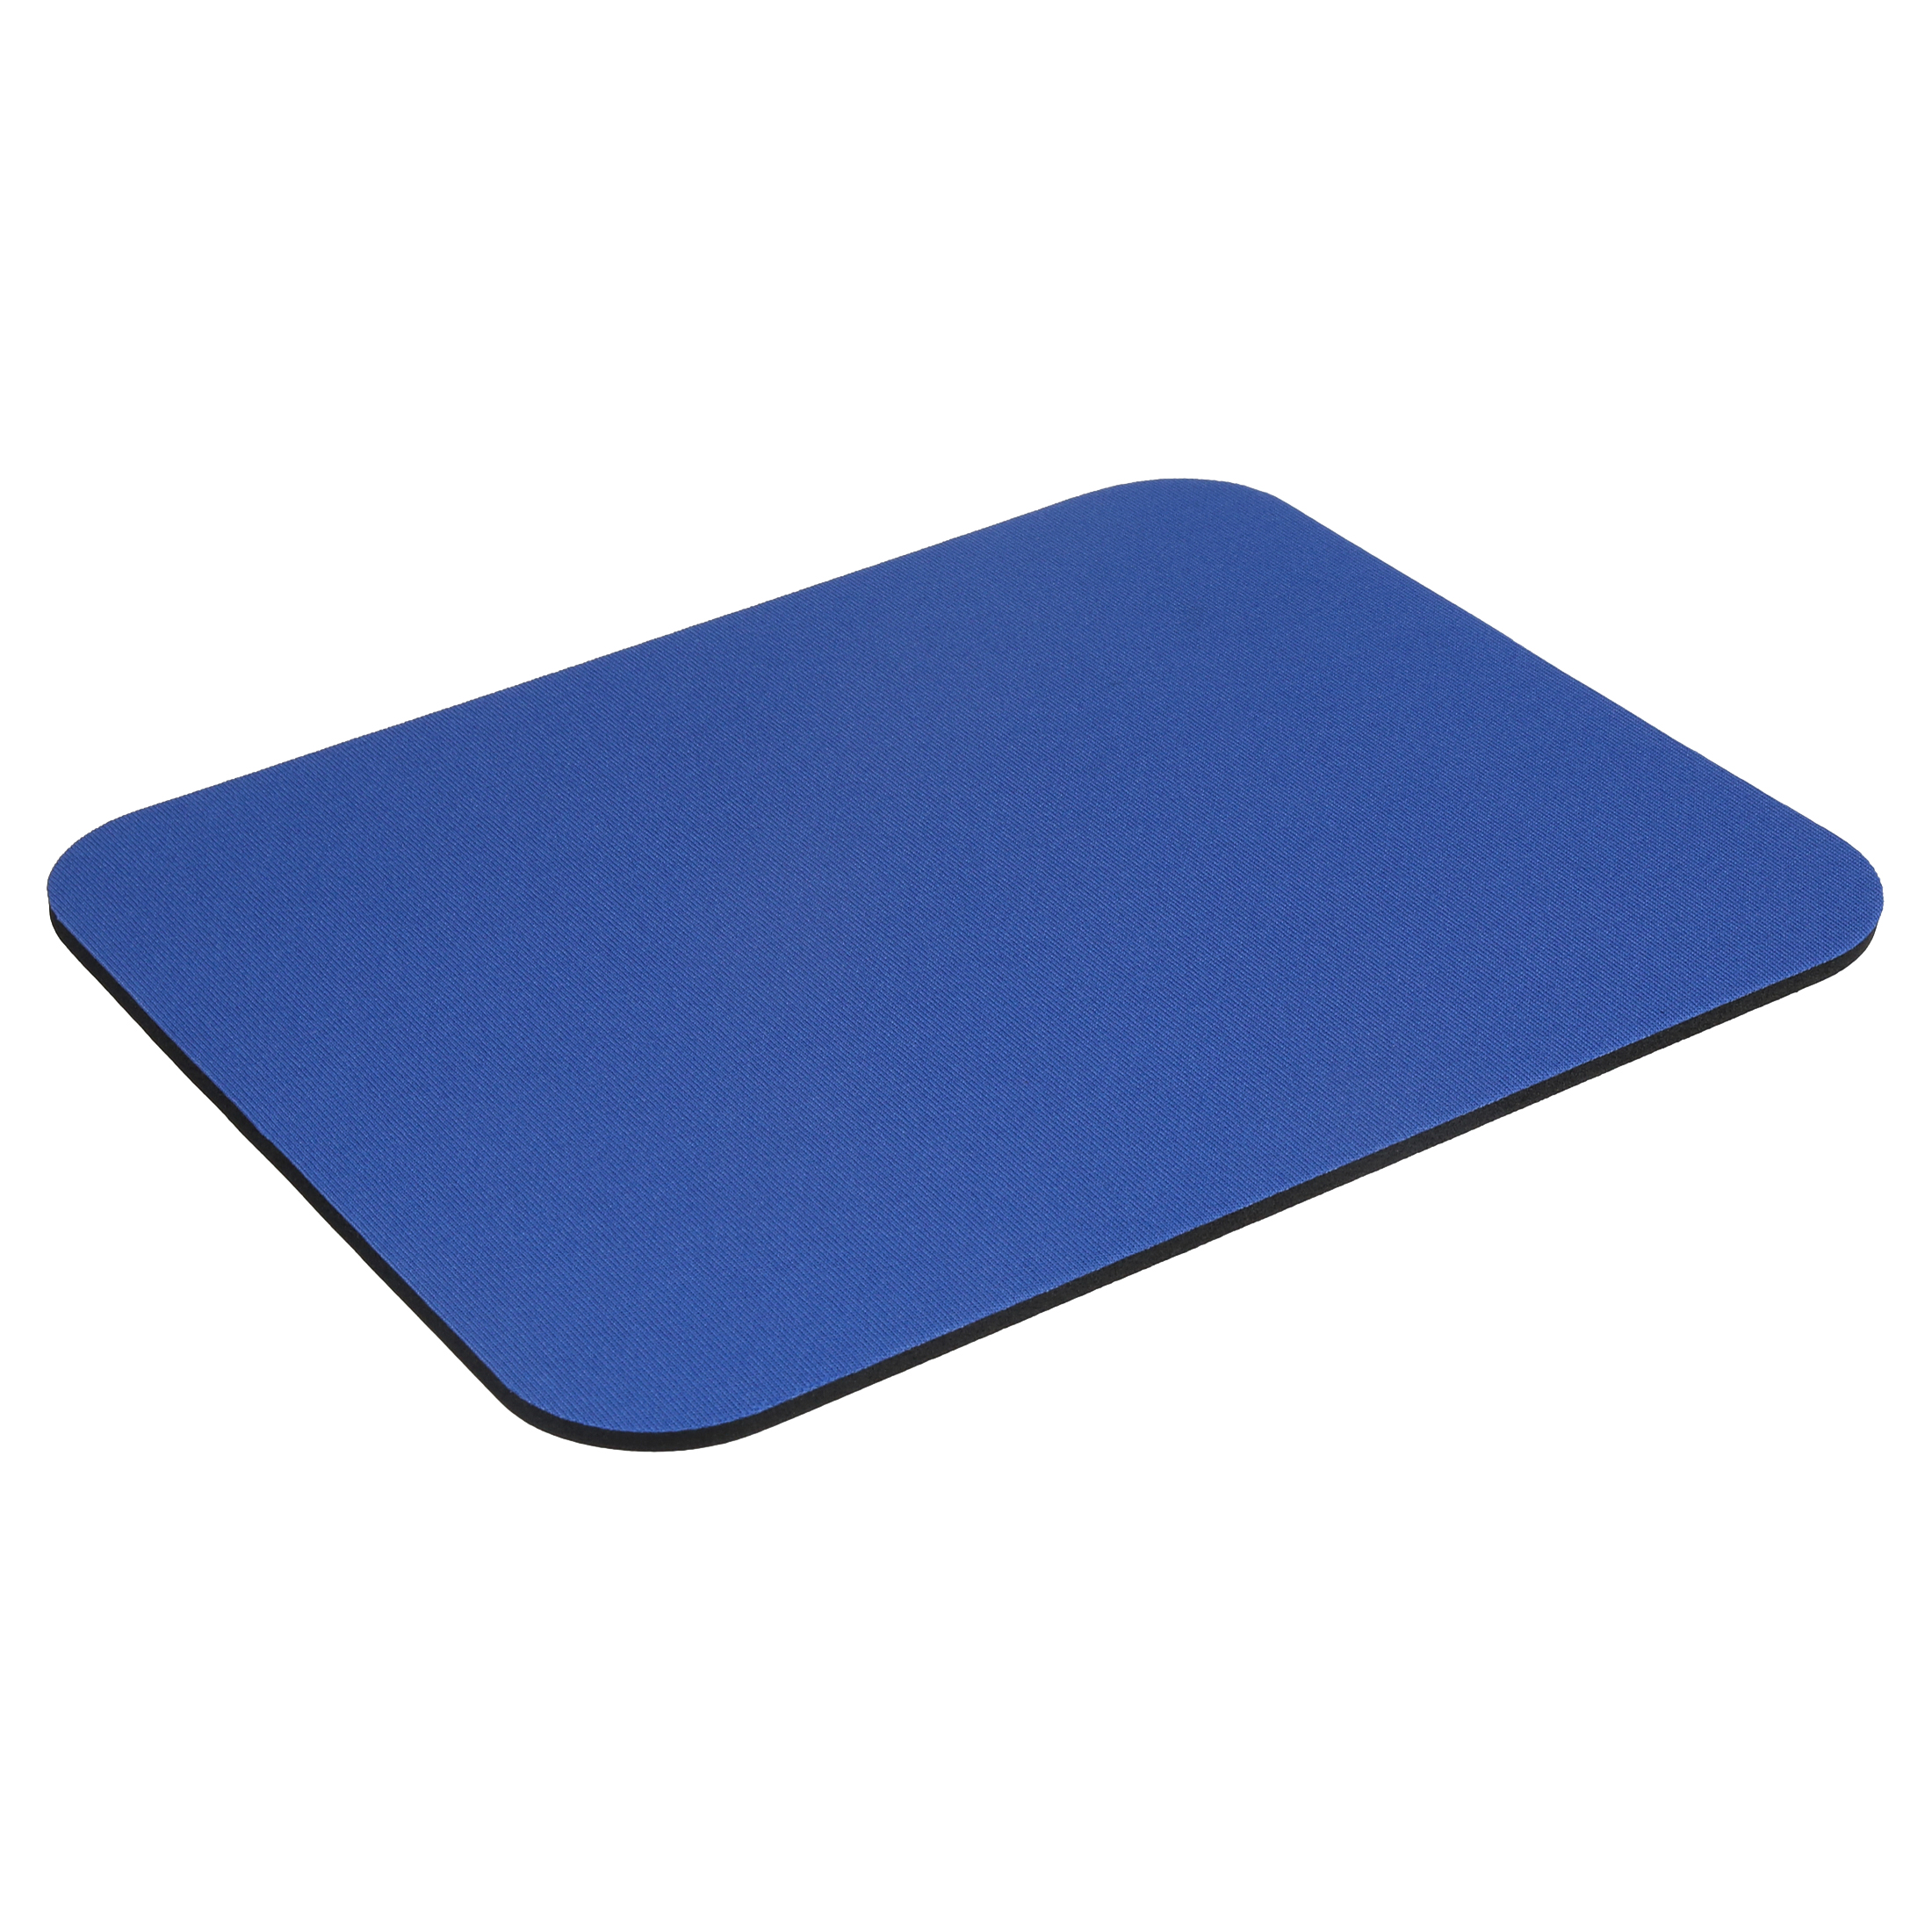 Belkin Non-Slip Neoprene Mouse Pad, Compatible with Wired and Wireless Mouse, Blue (1-Pack) - image 1 of 2